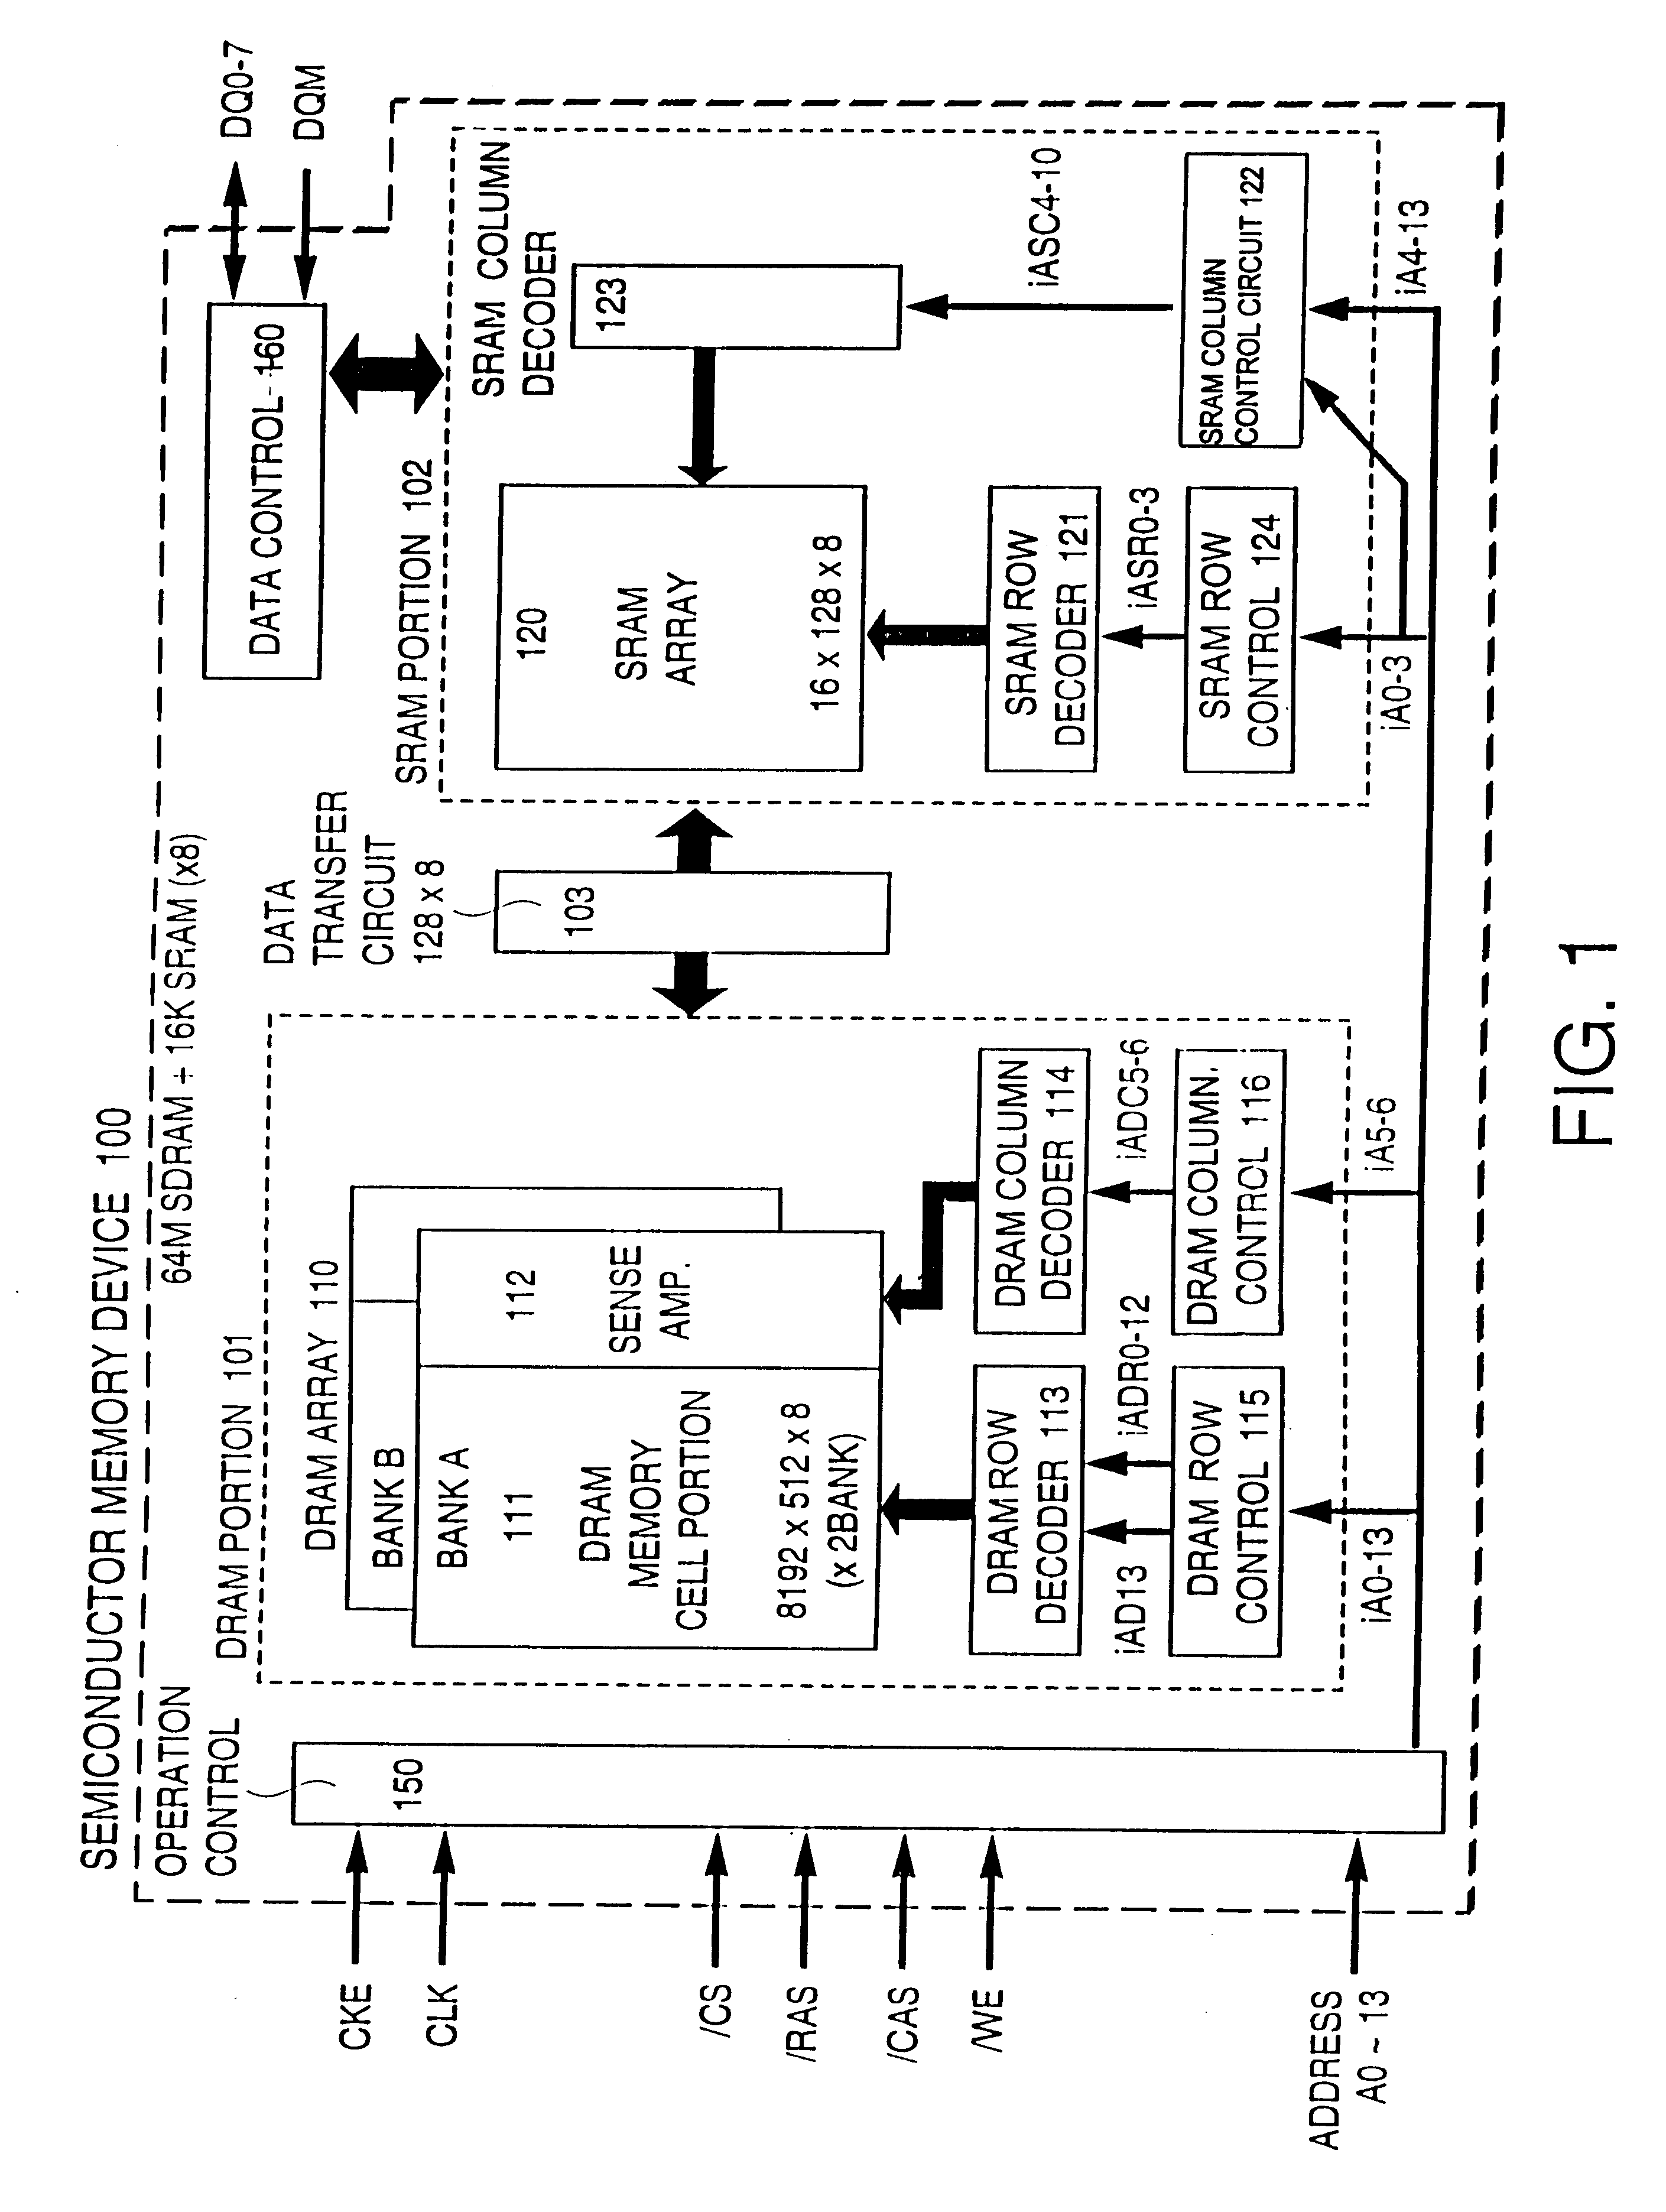 Semiconductor memory including main and sub memory portions having plural memory cell groups and a bidirectional data transfer circuit